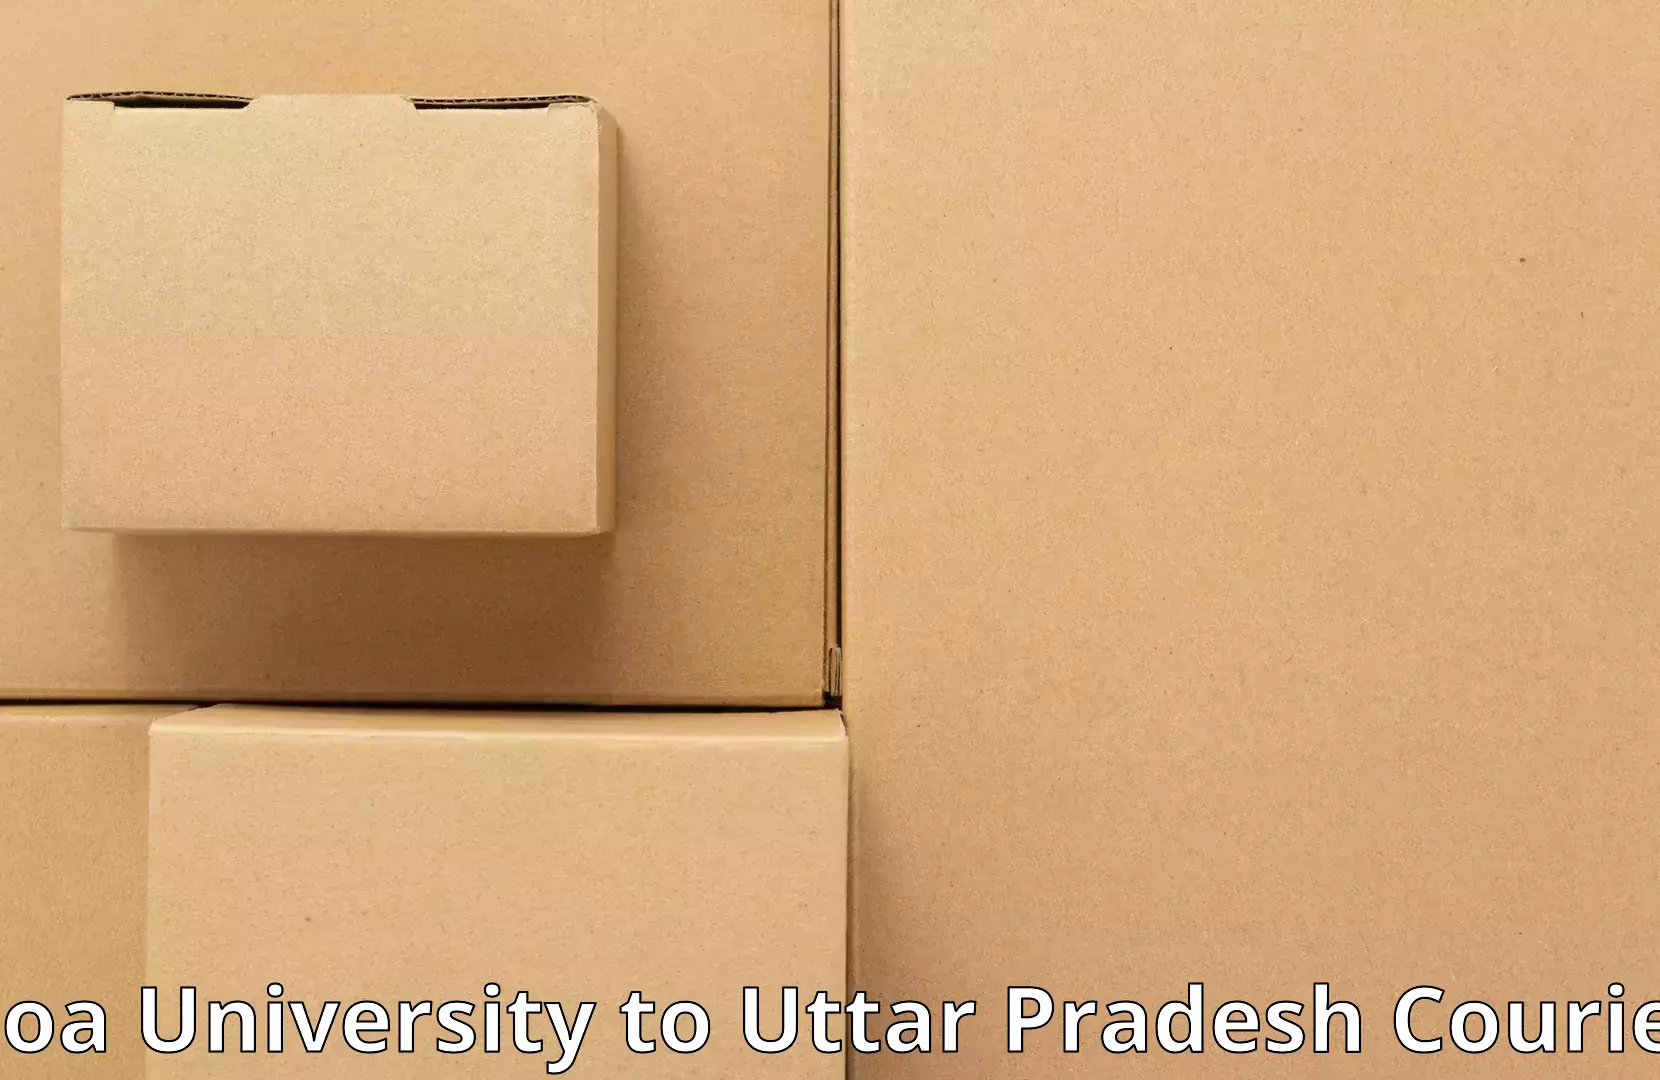 Personalized moving plans Goa University to Rath